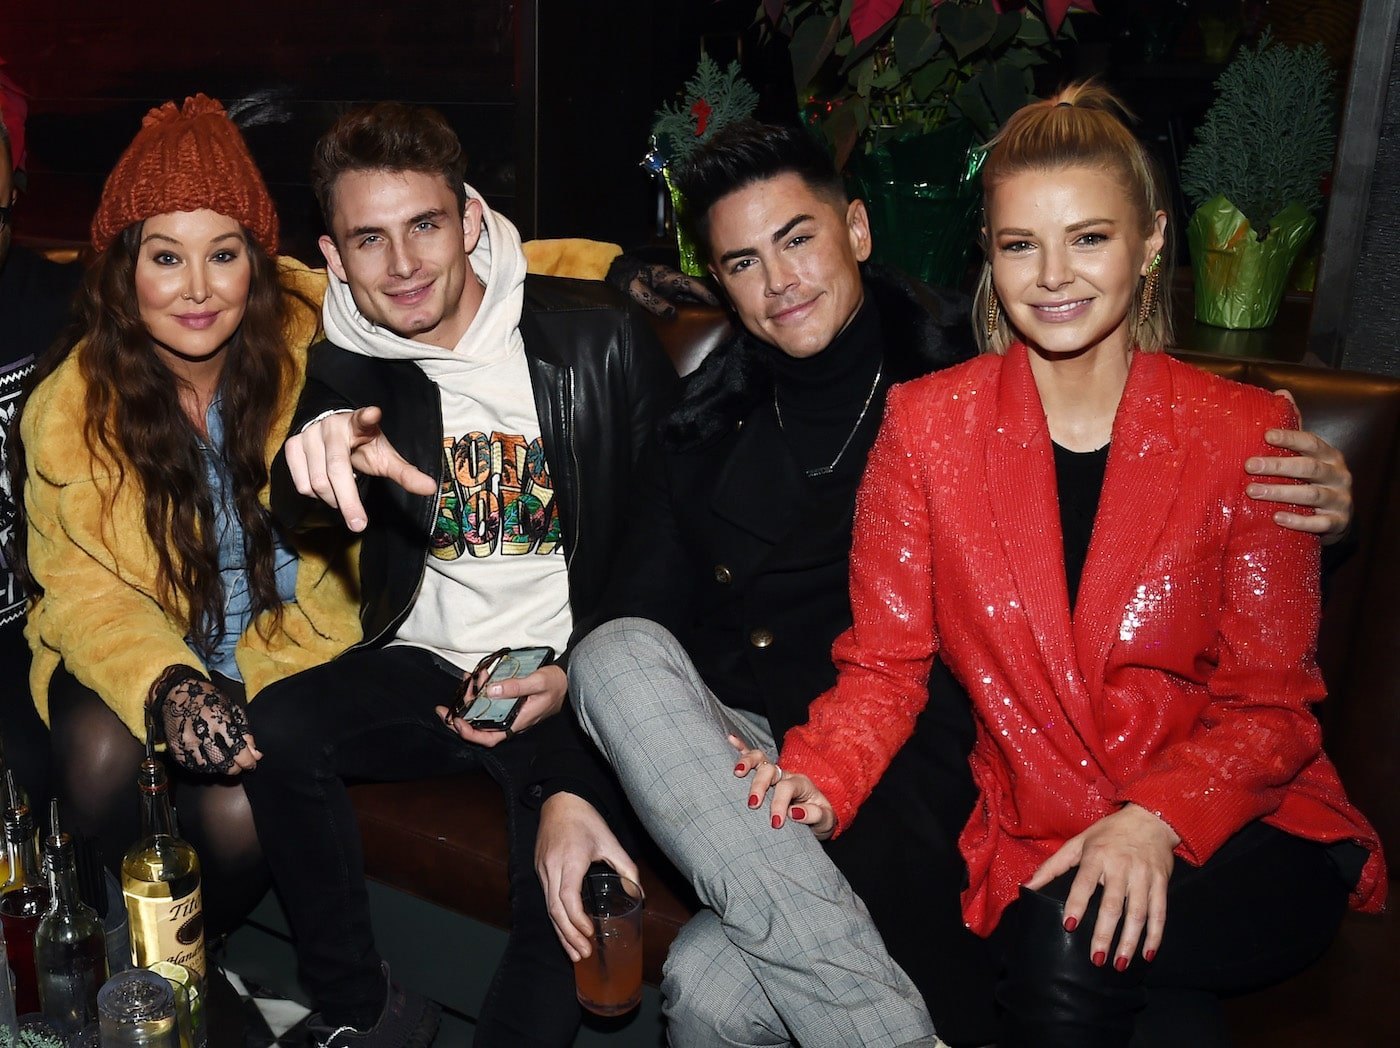 Billie Lee, James Kennedy, Tom Sandoval, and Ariana Madix from 'Vanderpump Rules' attend an event in 2019